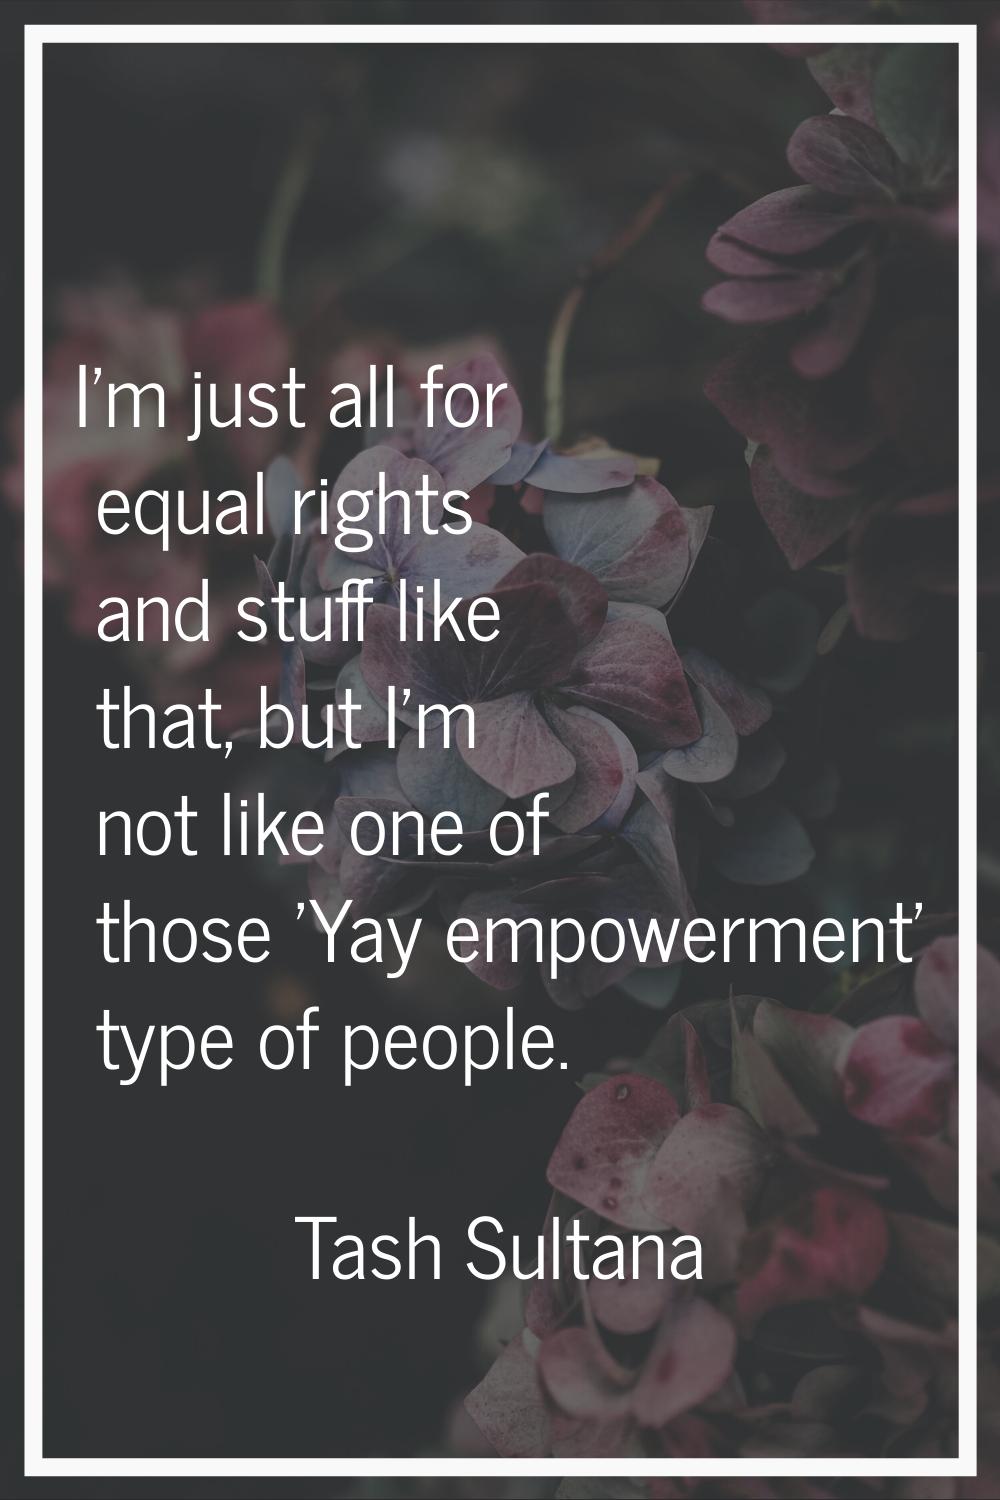 I'm just all for equal rights and stuff like that, but I'm not like one of those 'Yay empowerment' 